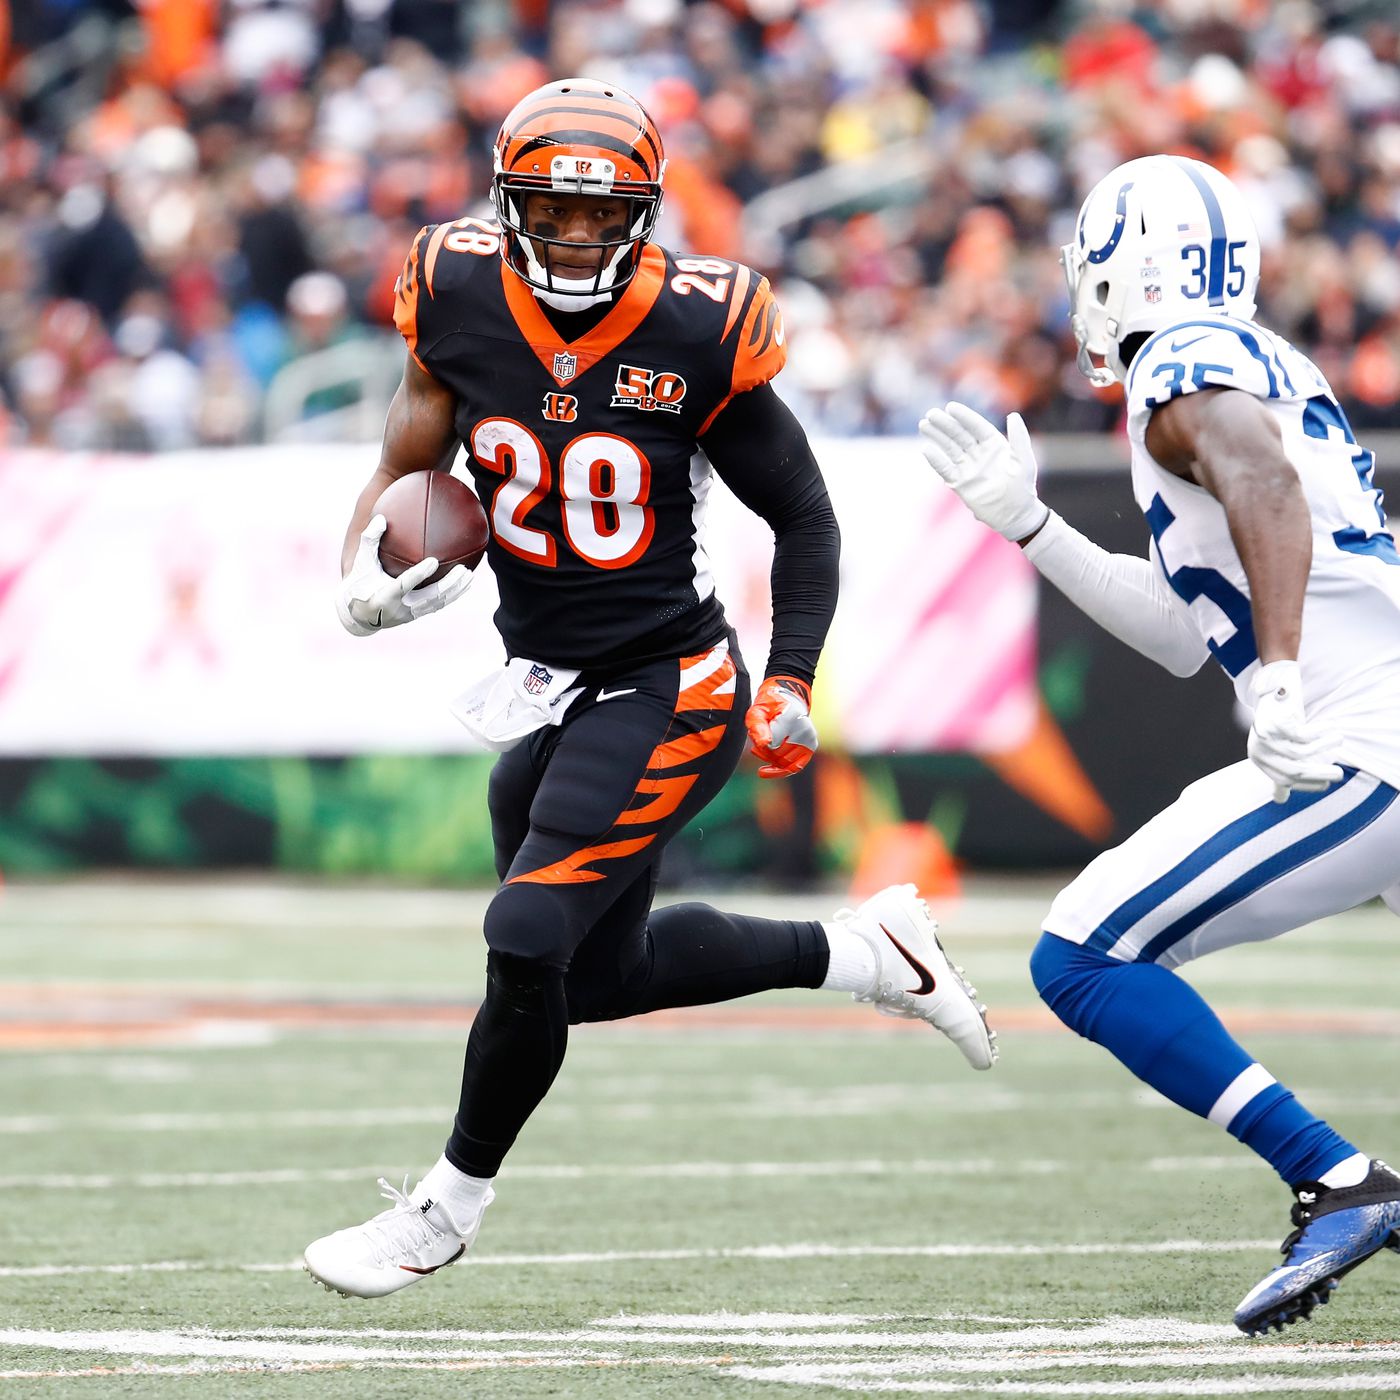 Bengals RB Joe Mixon celebrates touchdown with Milly Rock vs